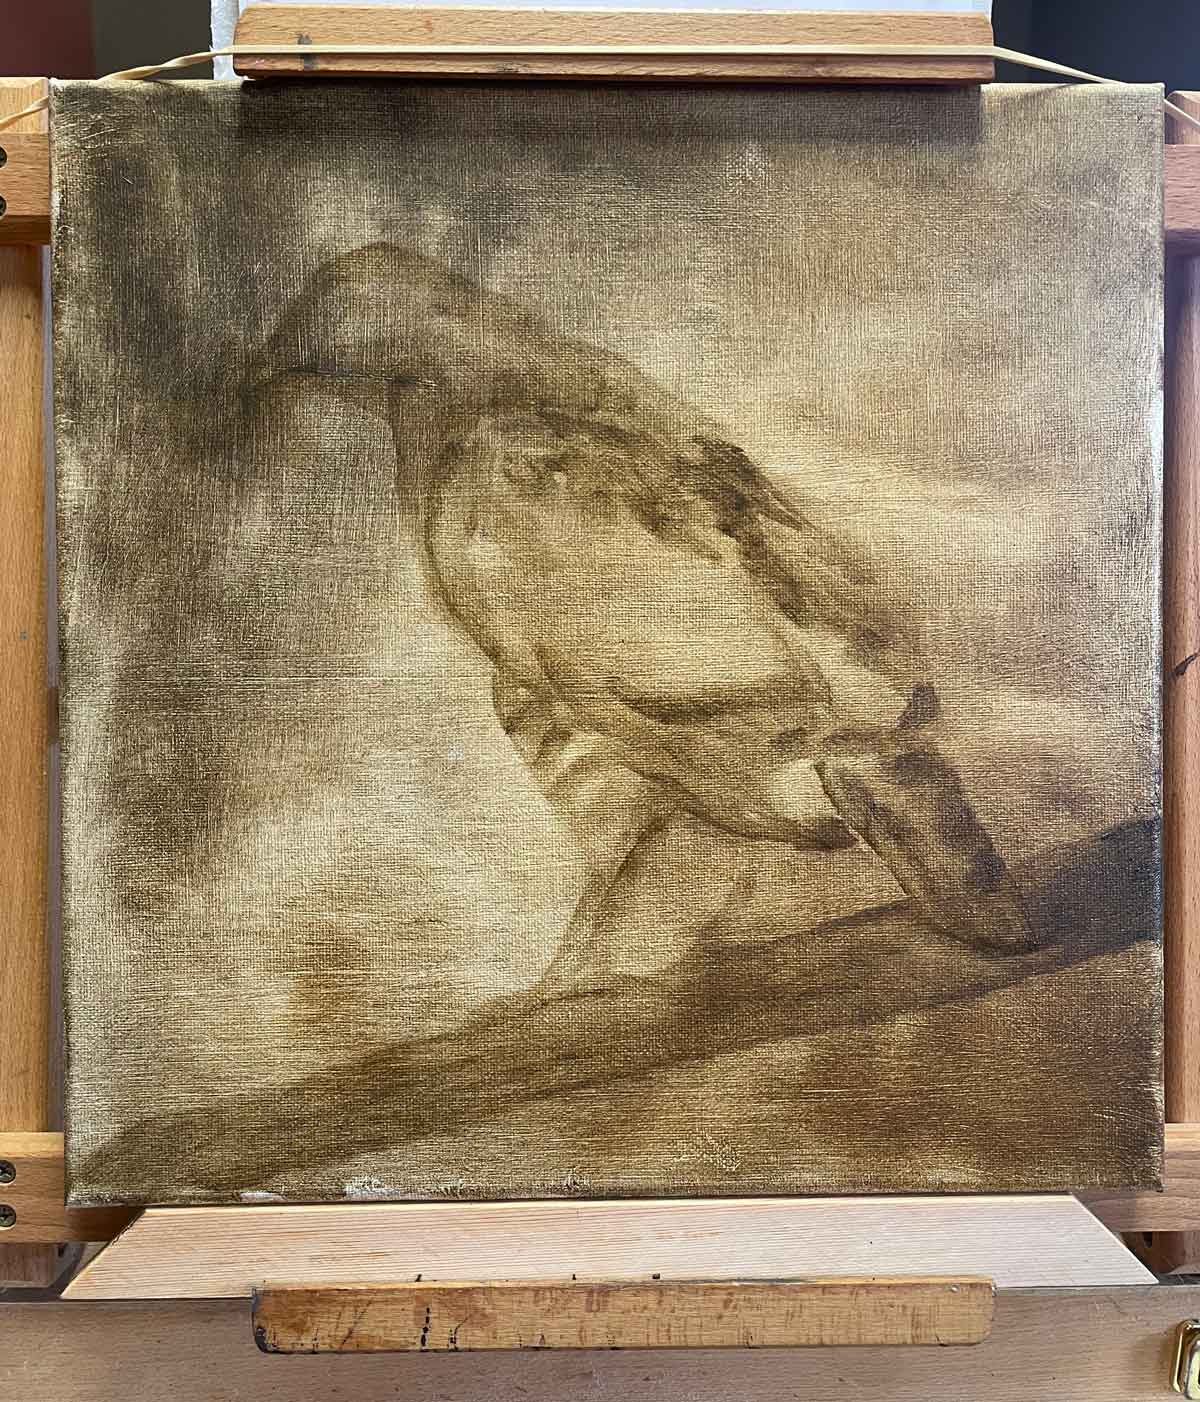 The first strokes on my broad-winged hawk painting.